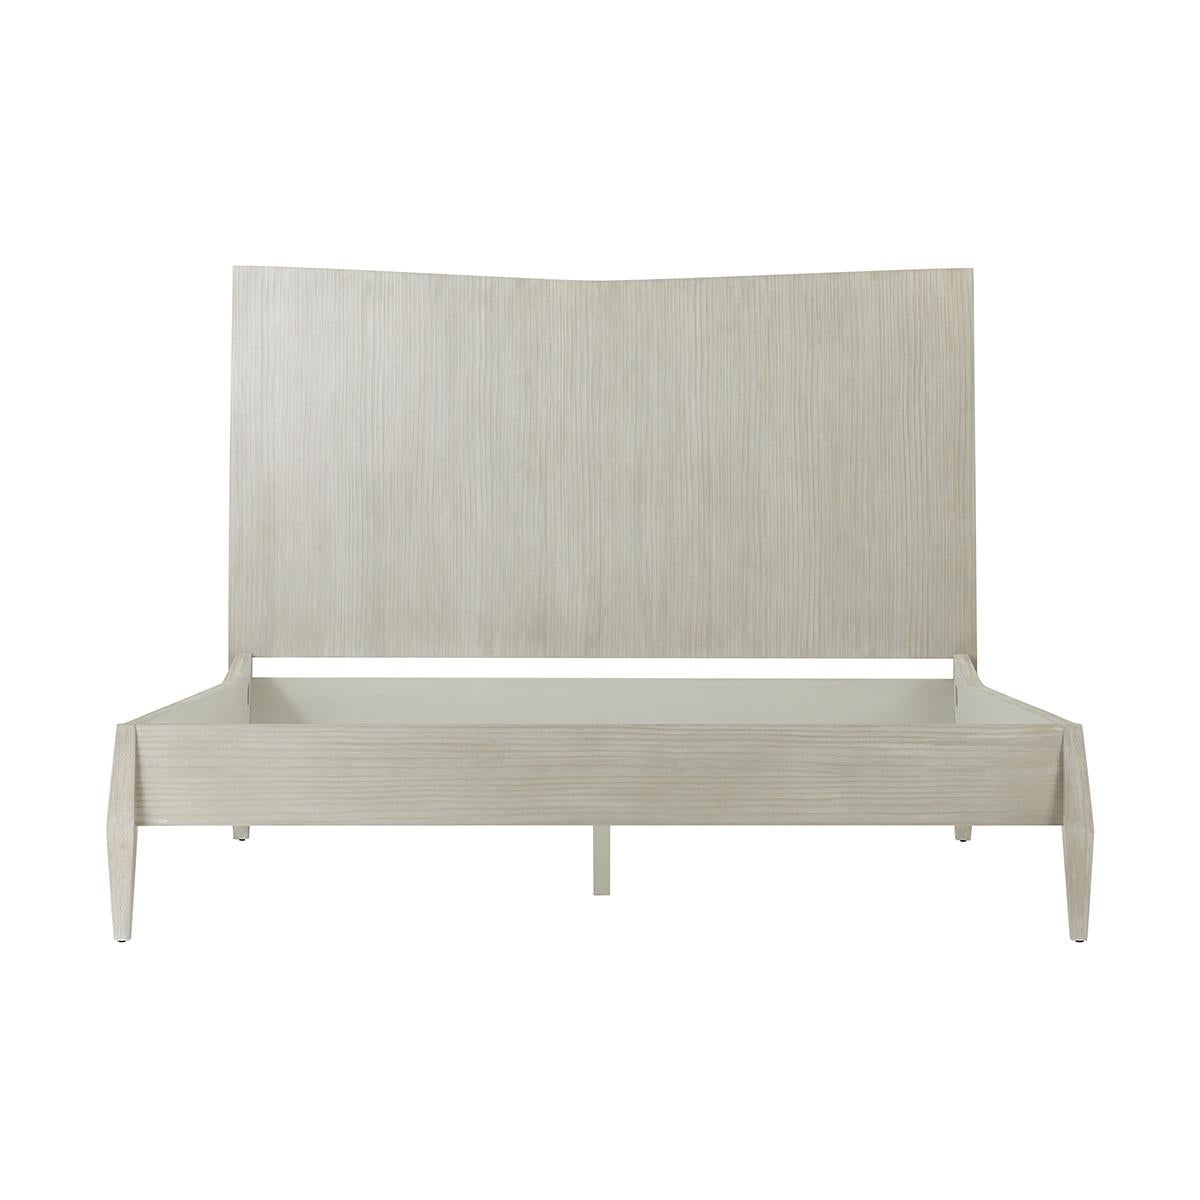 Contemporary Coastal Breeze Panel Bed Queen For Sale